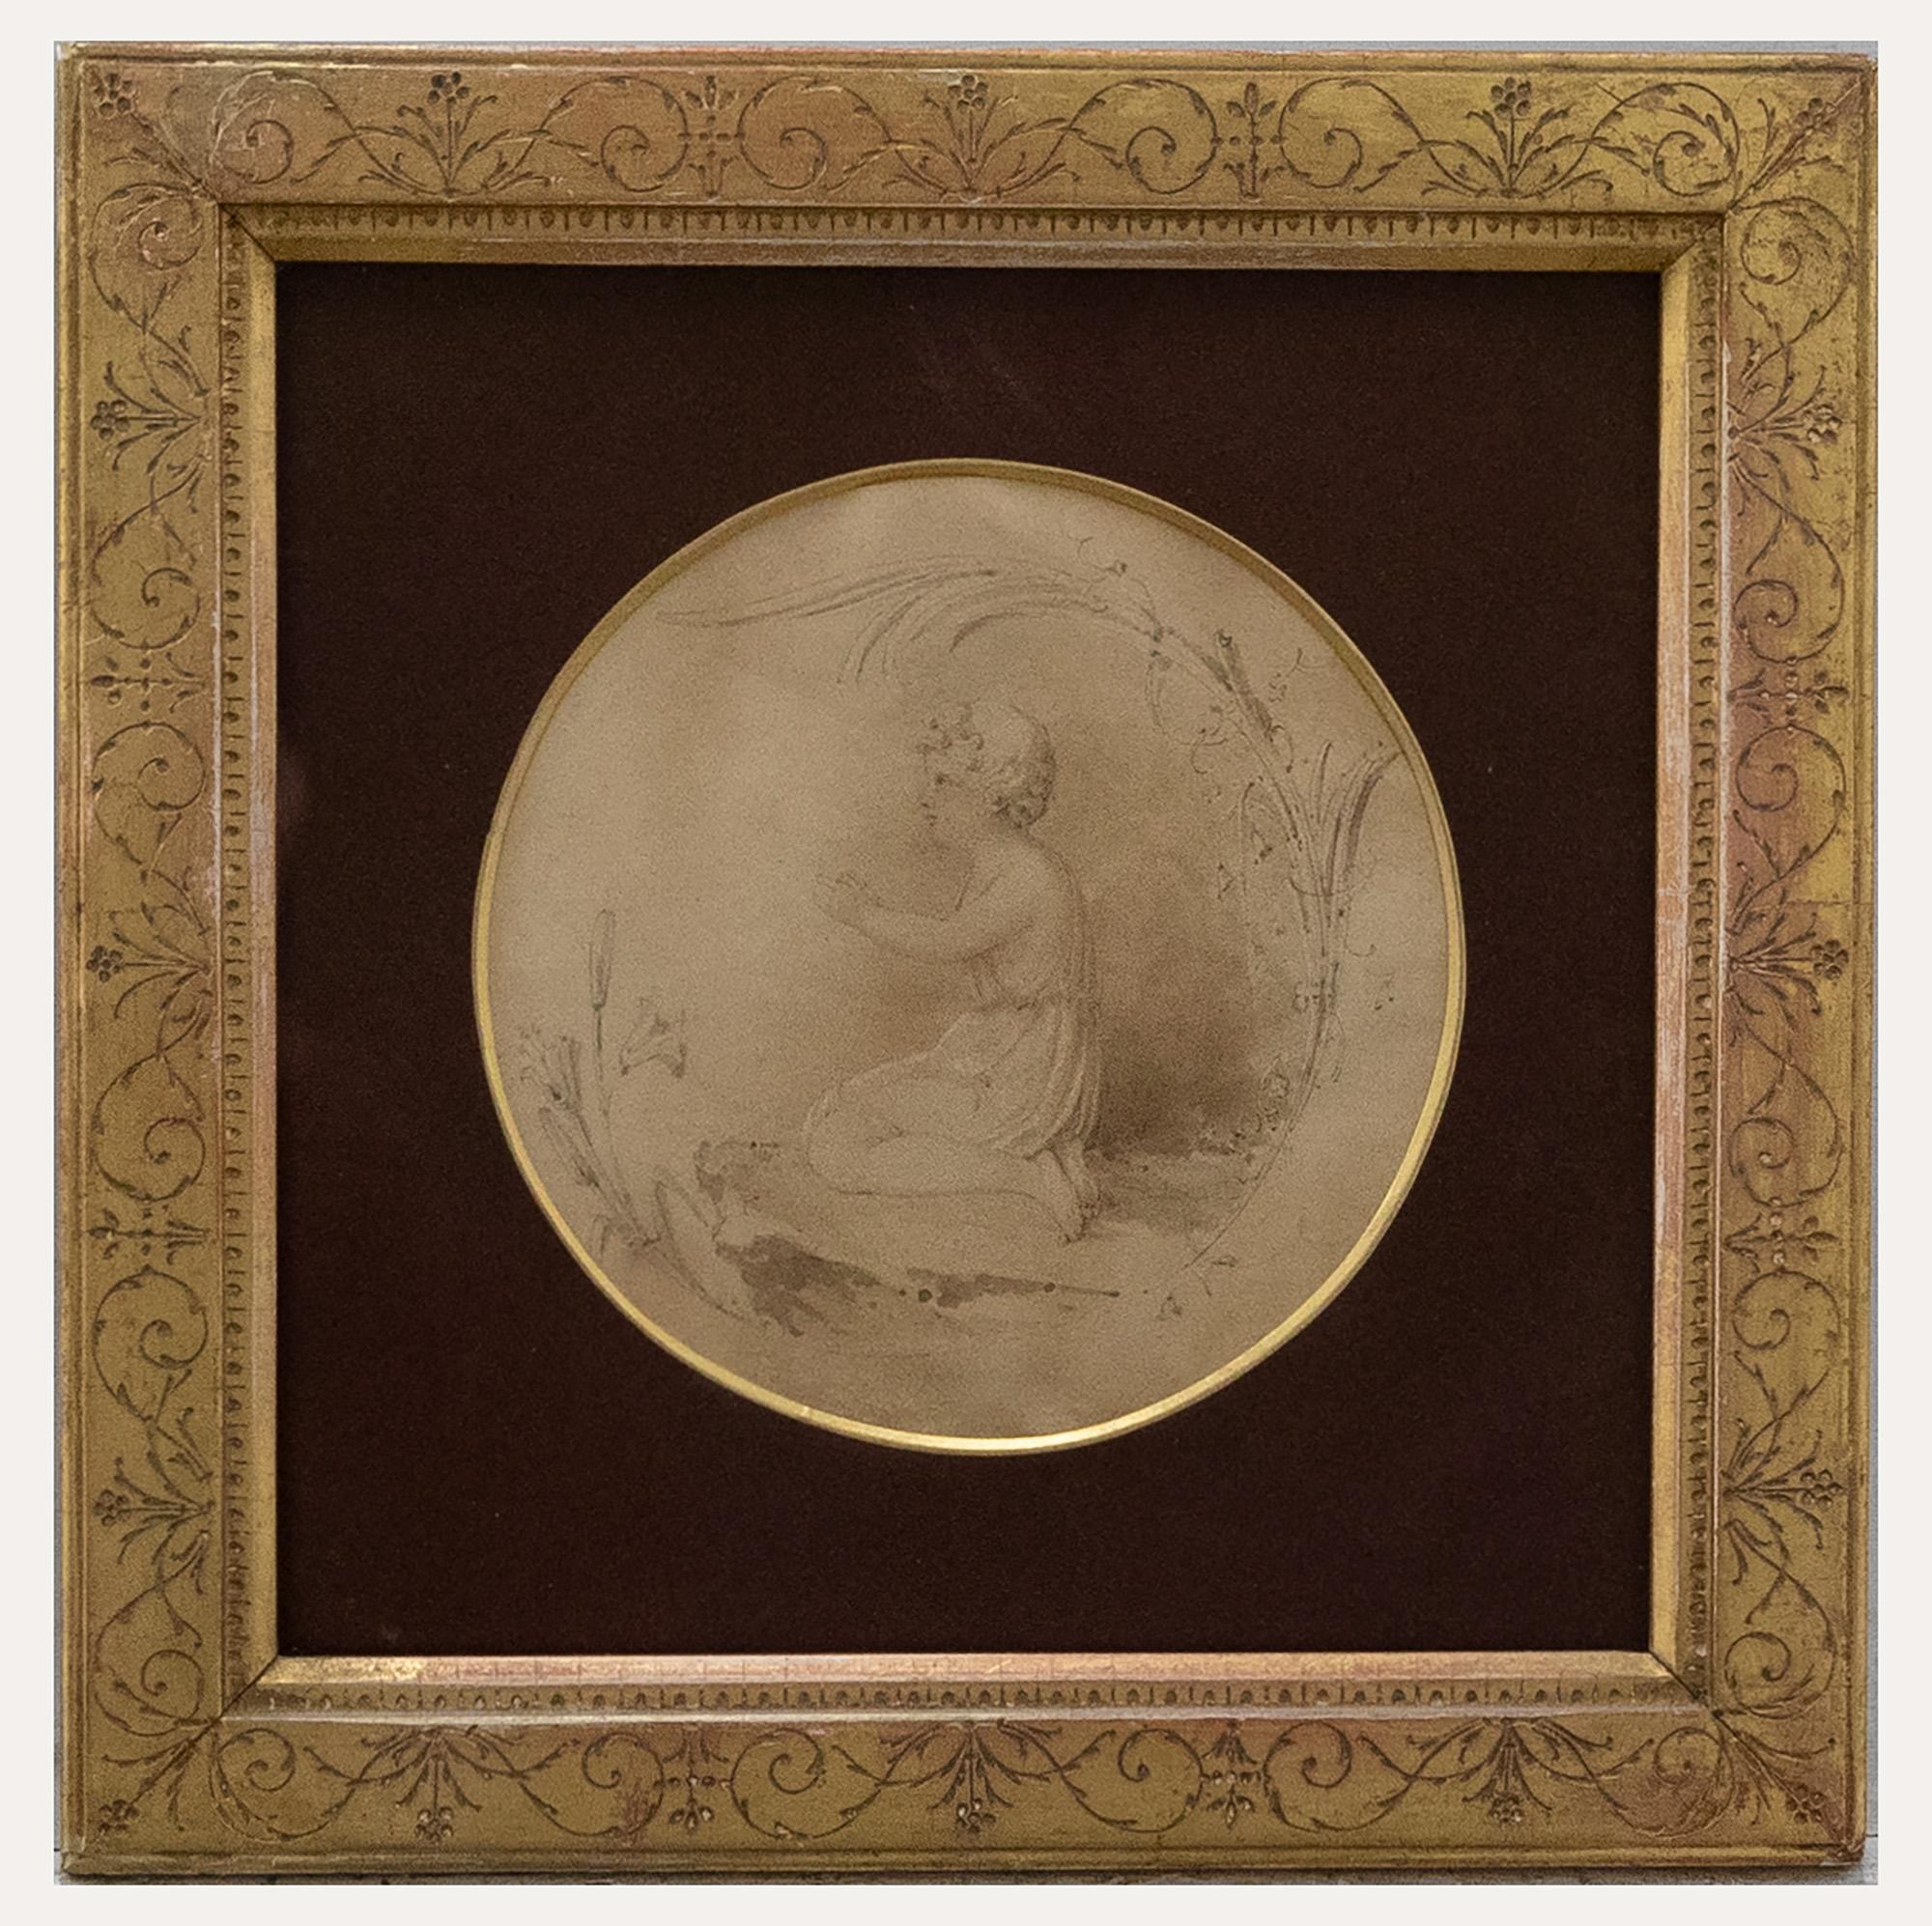 A delicate 18th century sepia watercolour depicting an angelic child praying amongst reeds. Beautifully presented in a period gilt frame with sgraffito decoration. Much of the artist's graphite workings can still be seen within scene. Inscribed